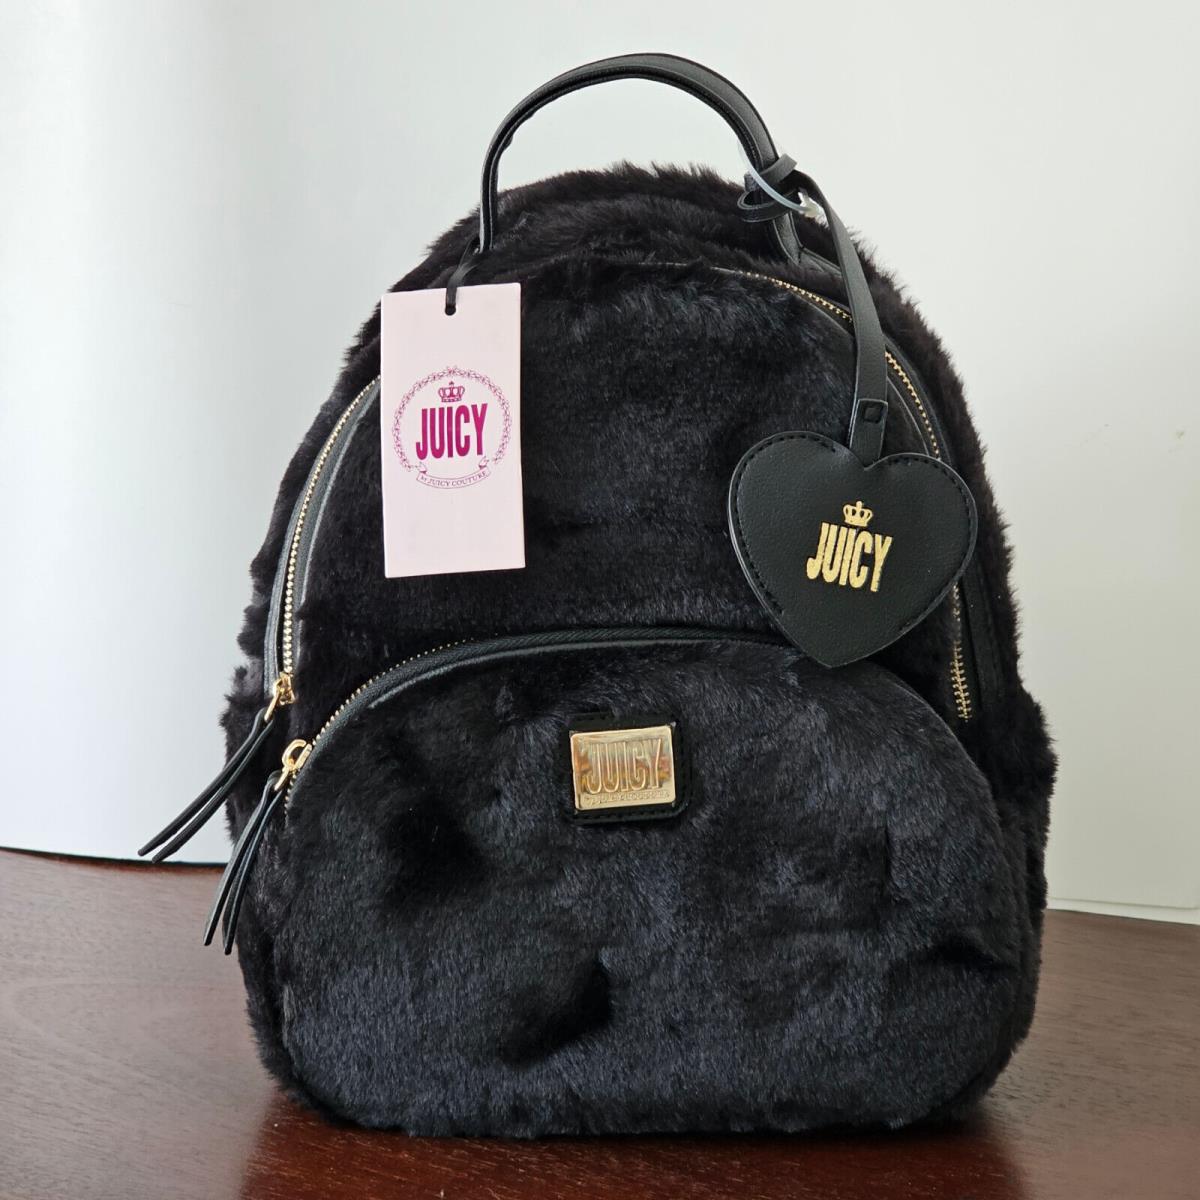 Juicy By Juicy Couture Fur Luxadelic Black Adjustable Straps Backpack